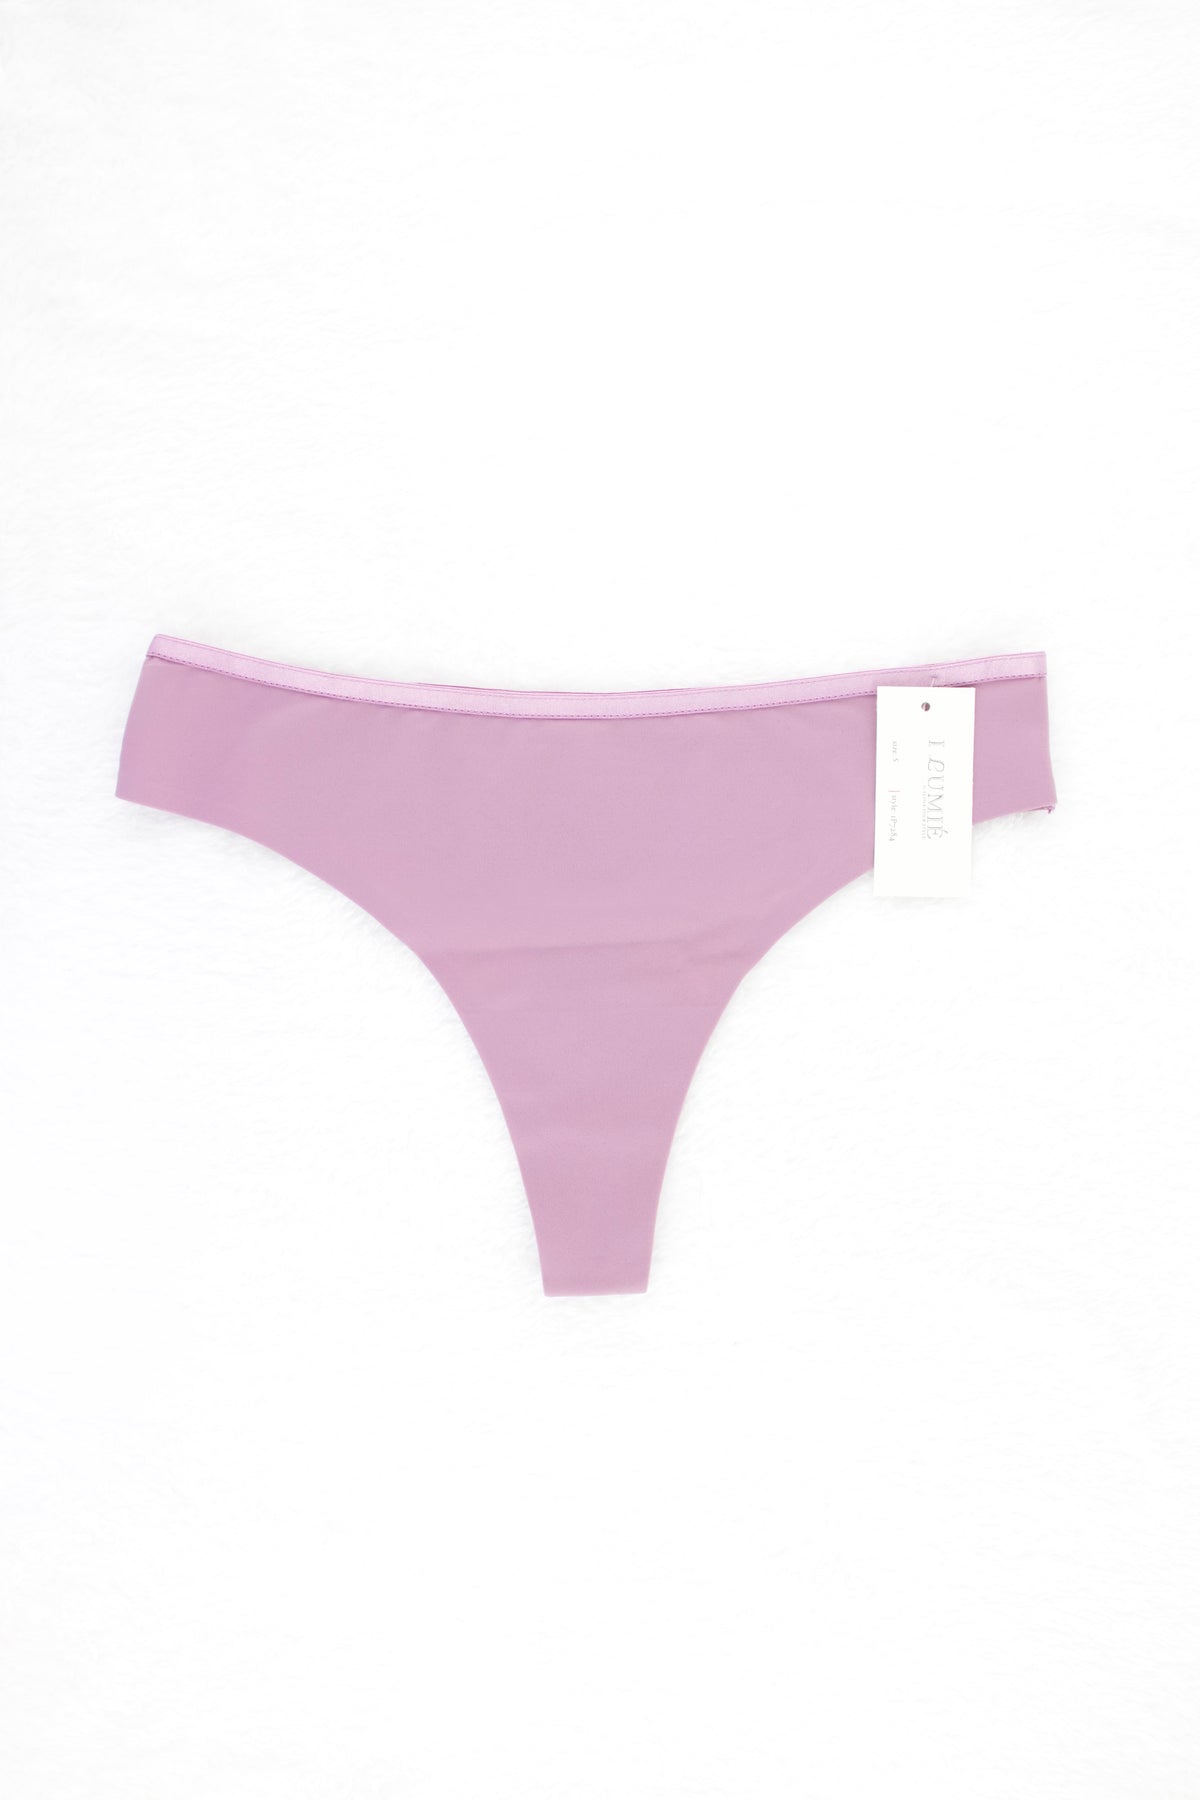 Purchase the newest TANGA SIN COSTURA IP7284 ILYS at an affordable price